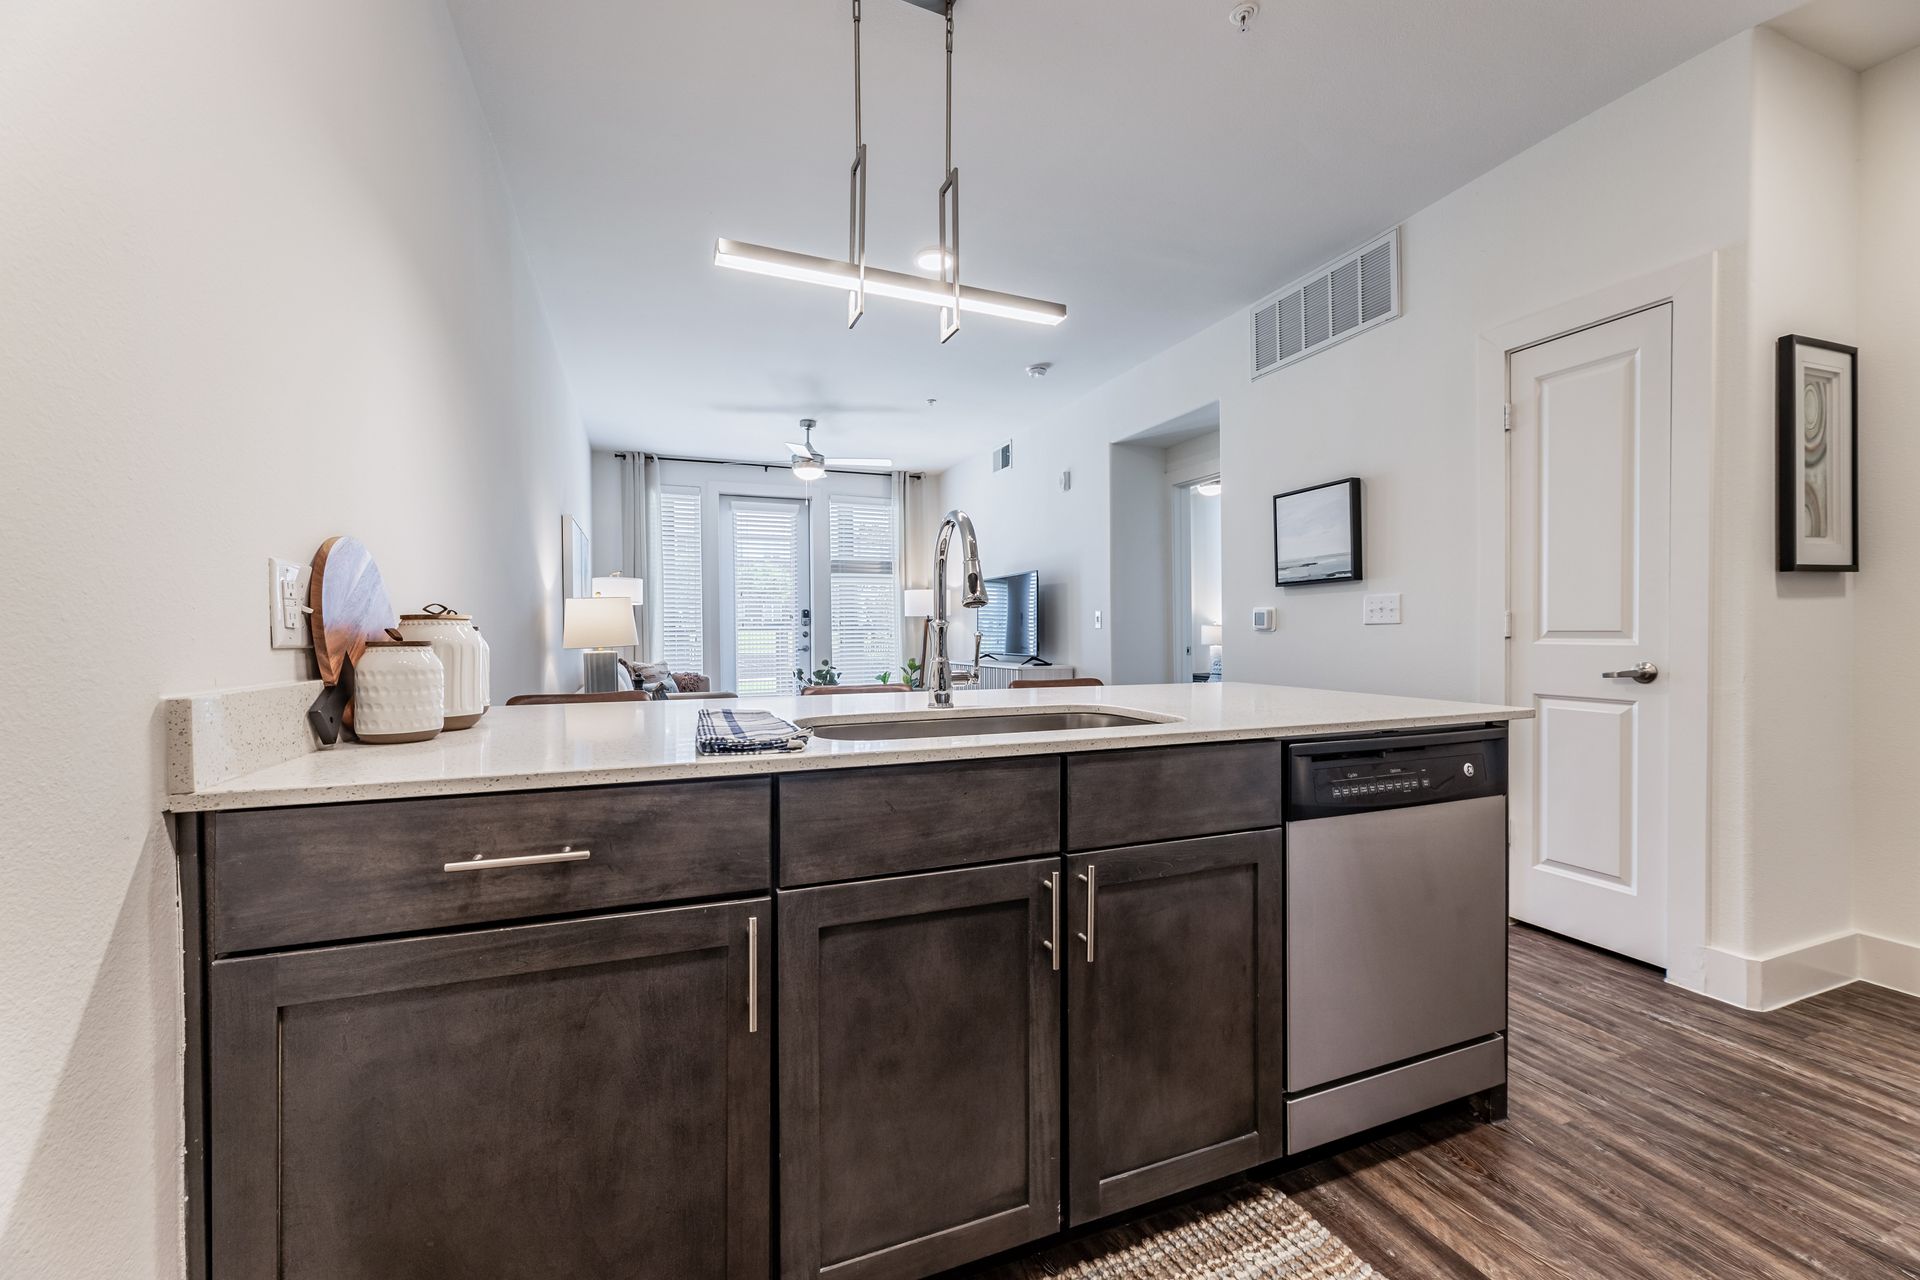 A kitchen with a sink, dishwasher, and stainless steel appliances at Parkside at Craig Ranch.